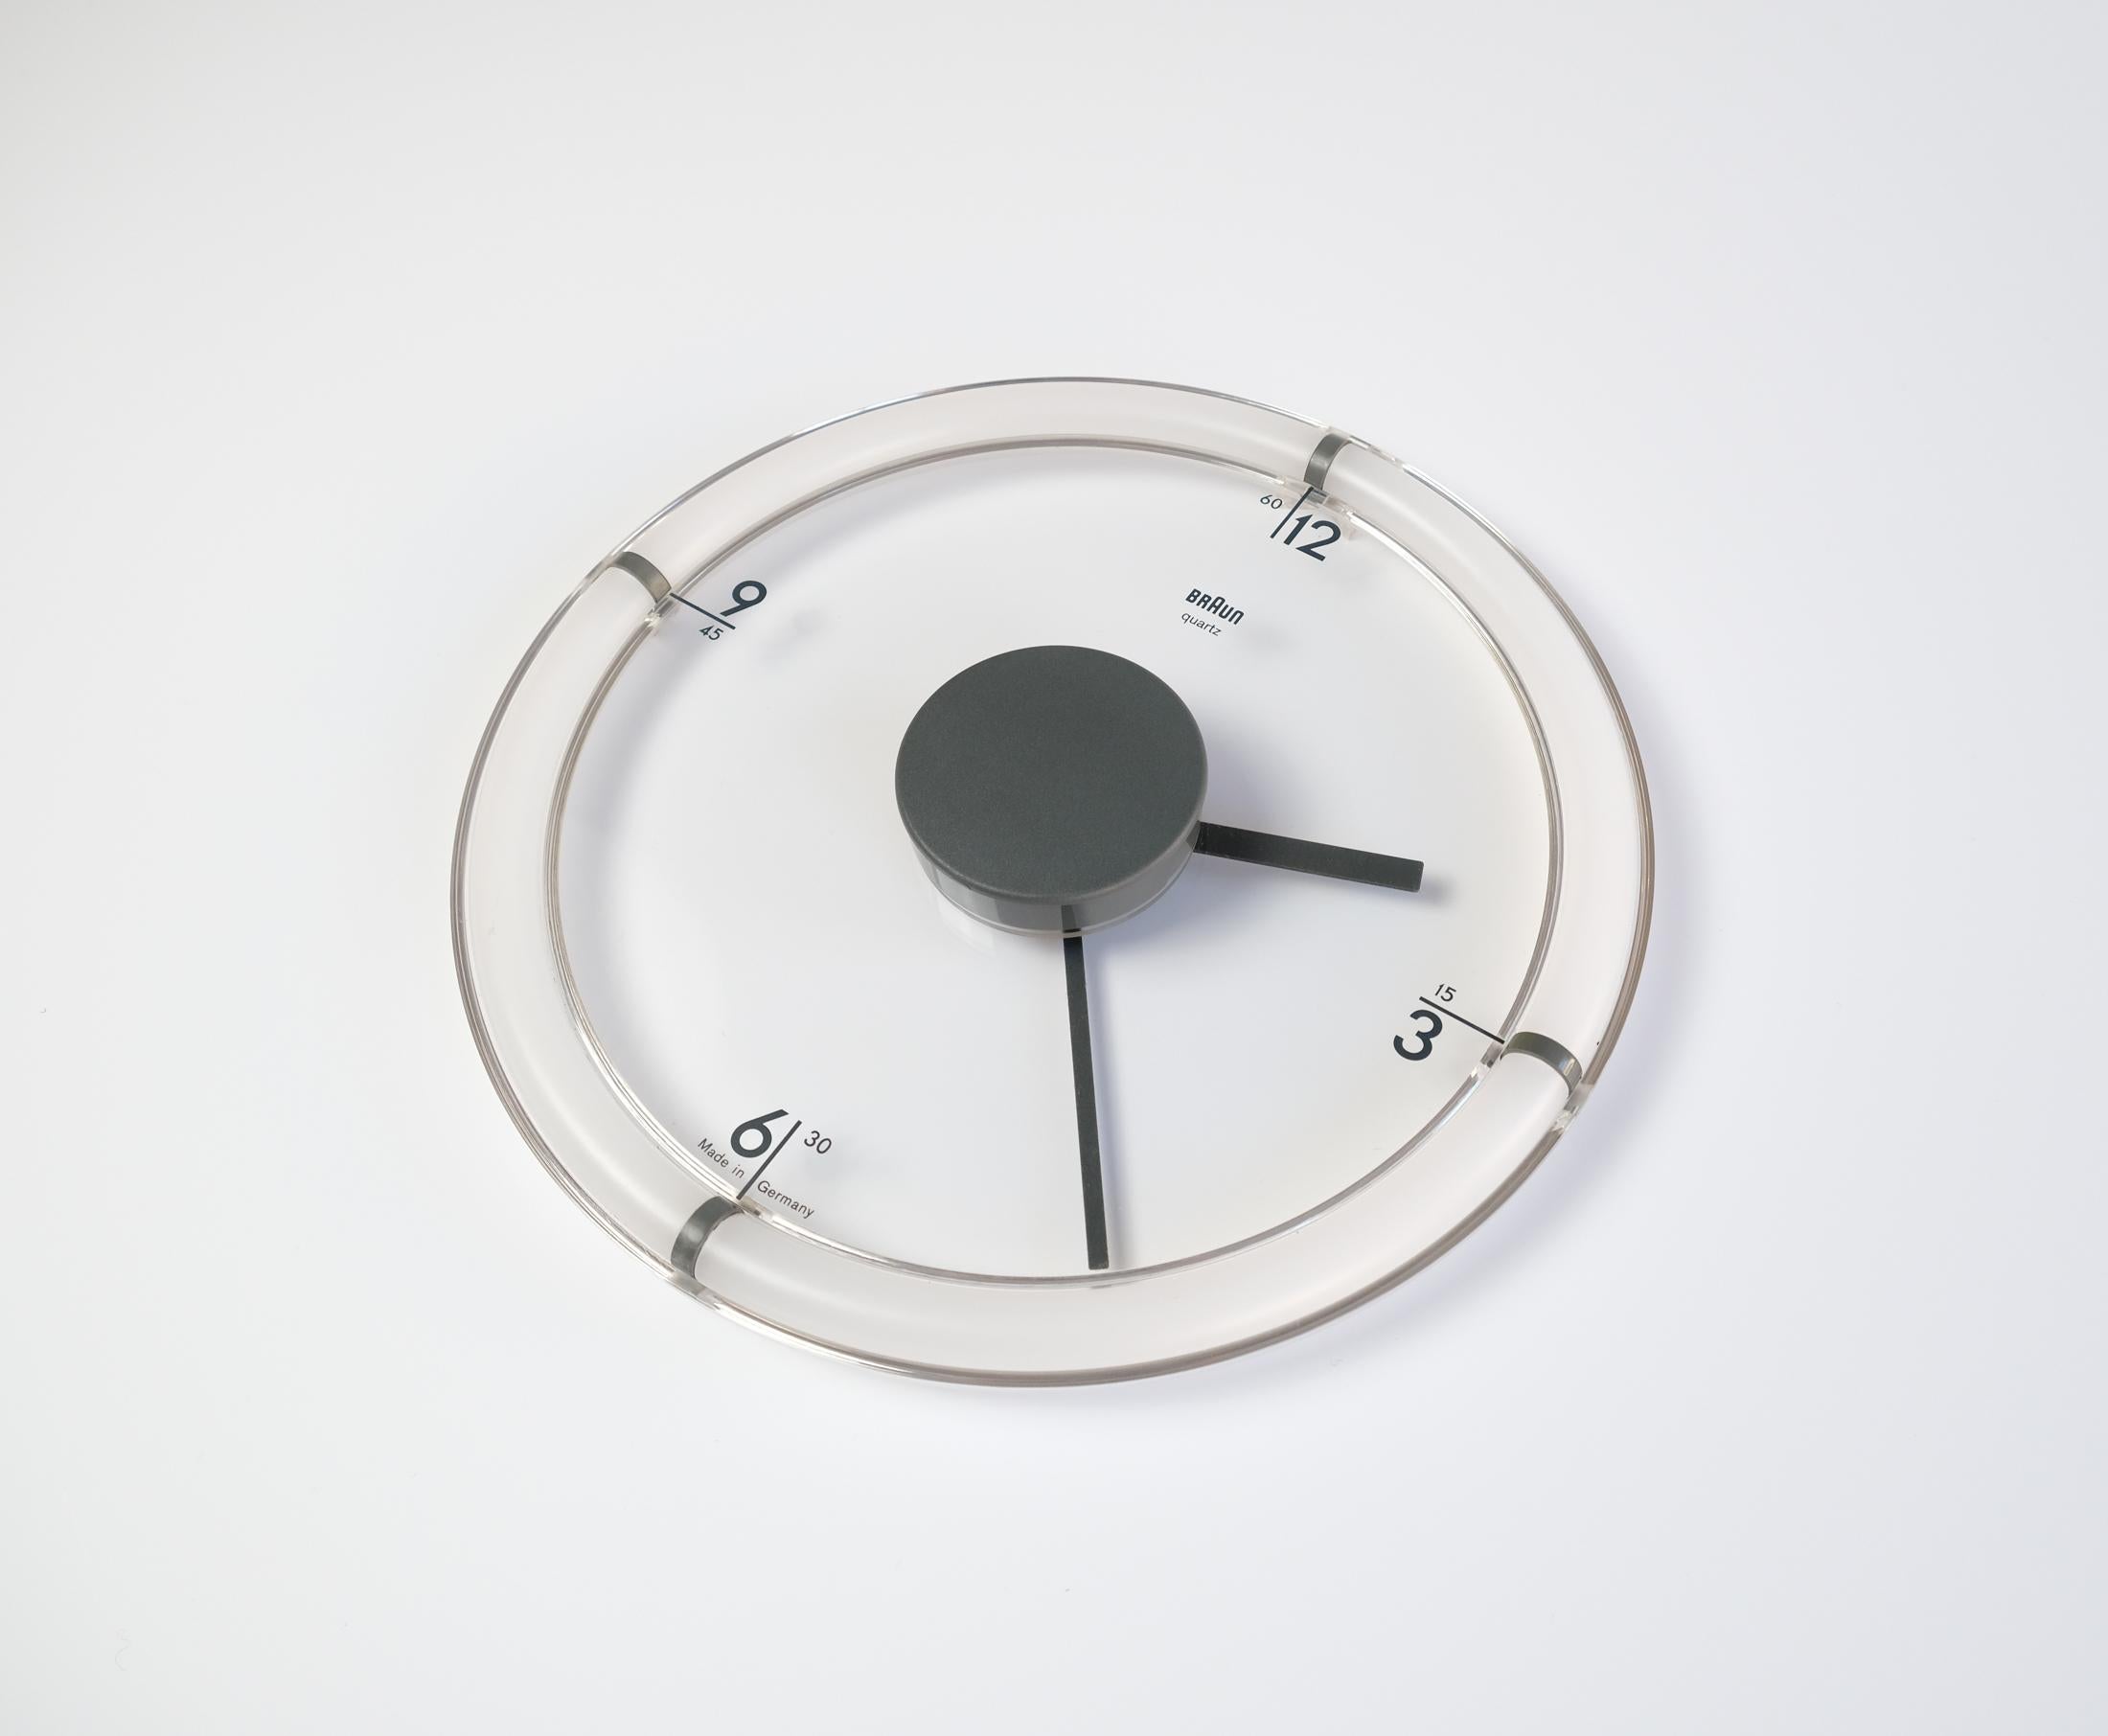 A rare and iconic Model ABW-35 BRAUN wall clock designed by Dietrich Lubs in 1988. 

With the ABW 35, Lubs devised a way for the clock to blend into whatever background it's placed over by making the face transparent. Equally, the numbers and hands